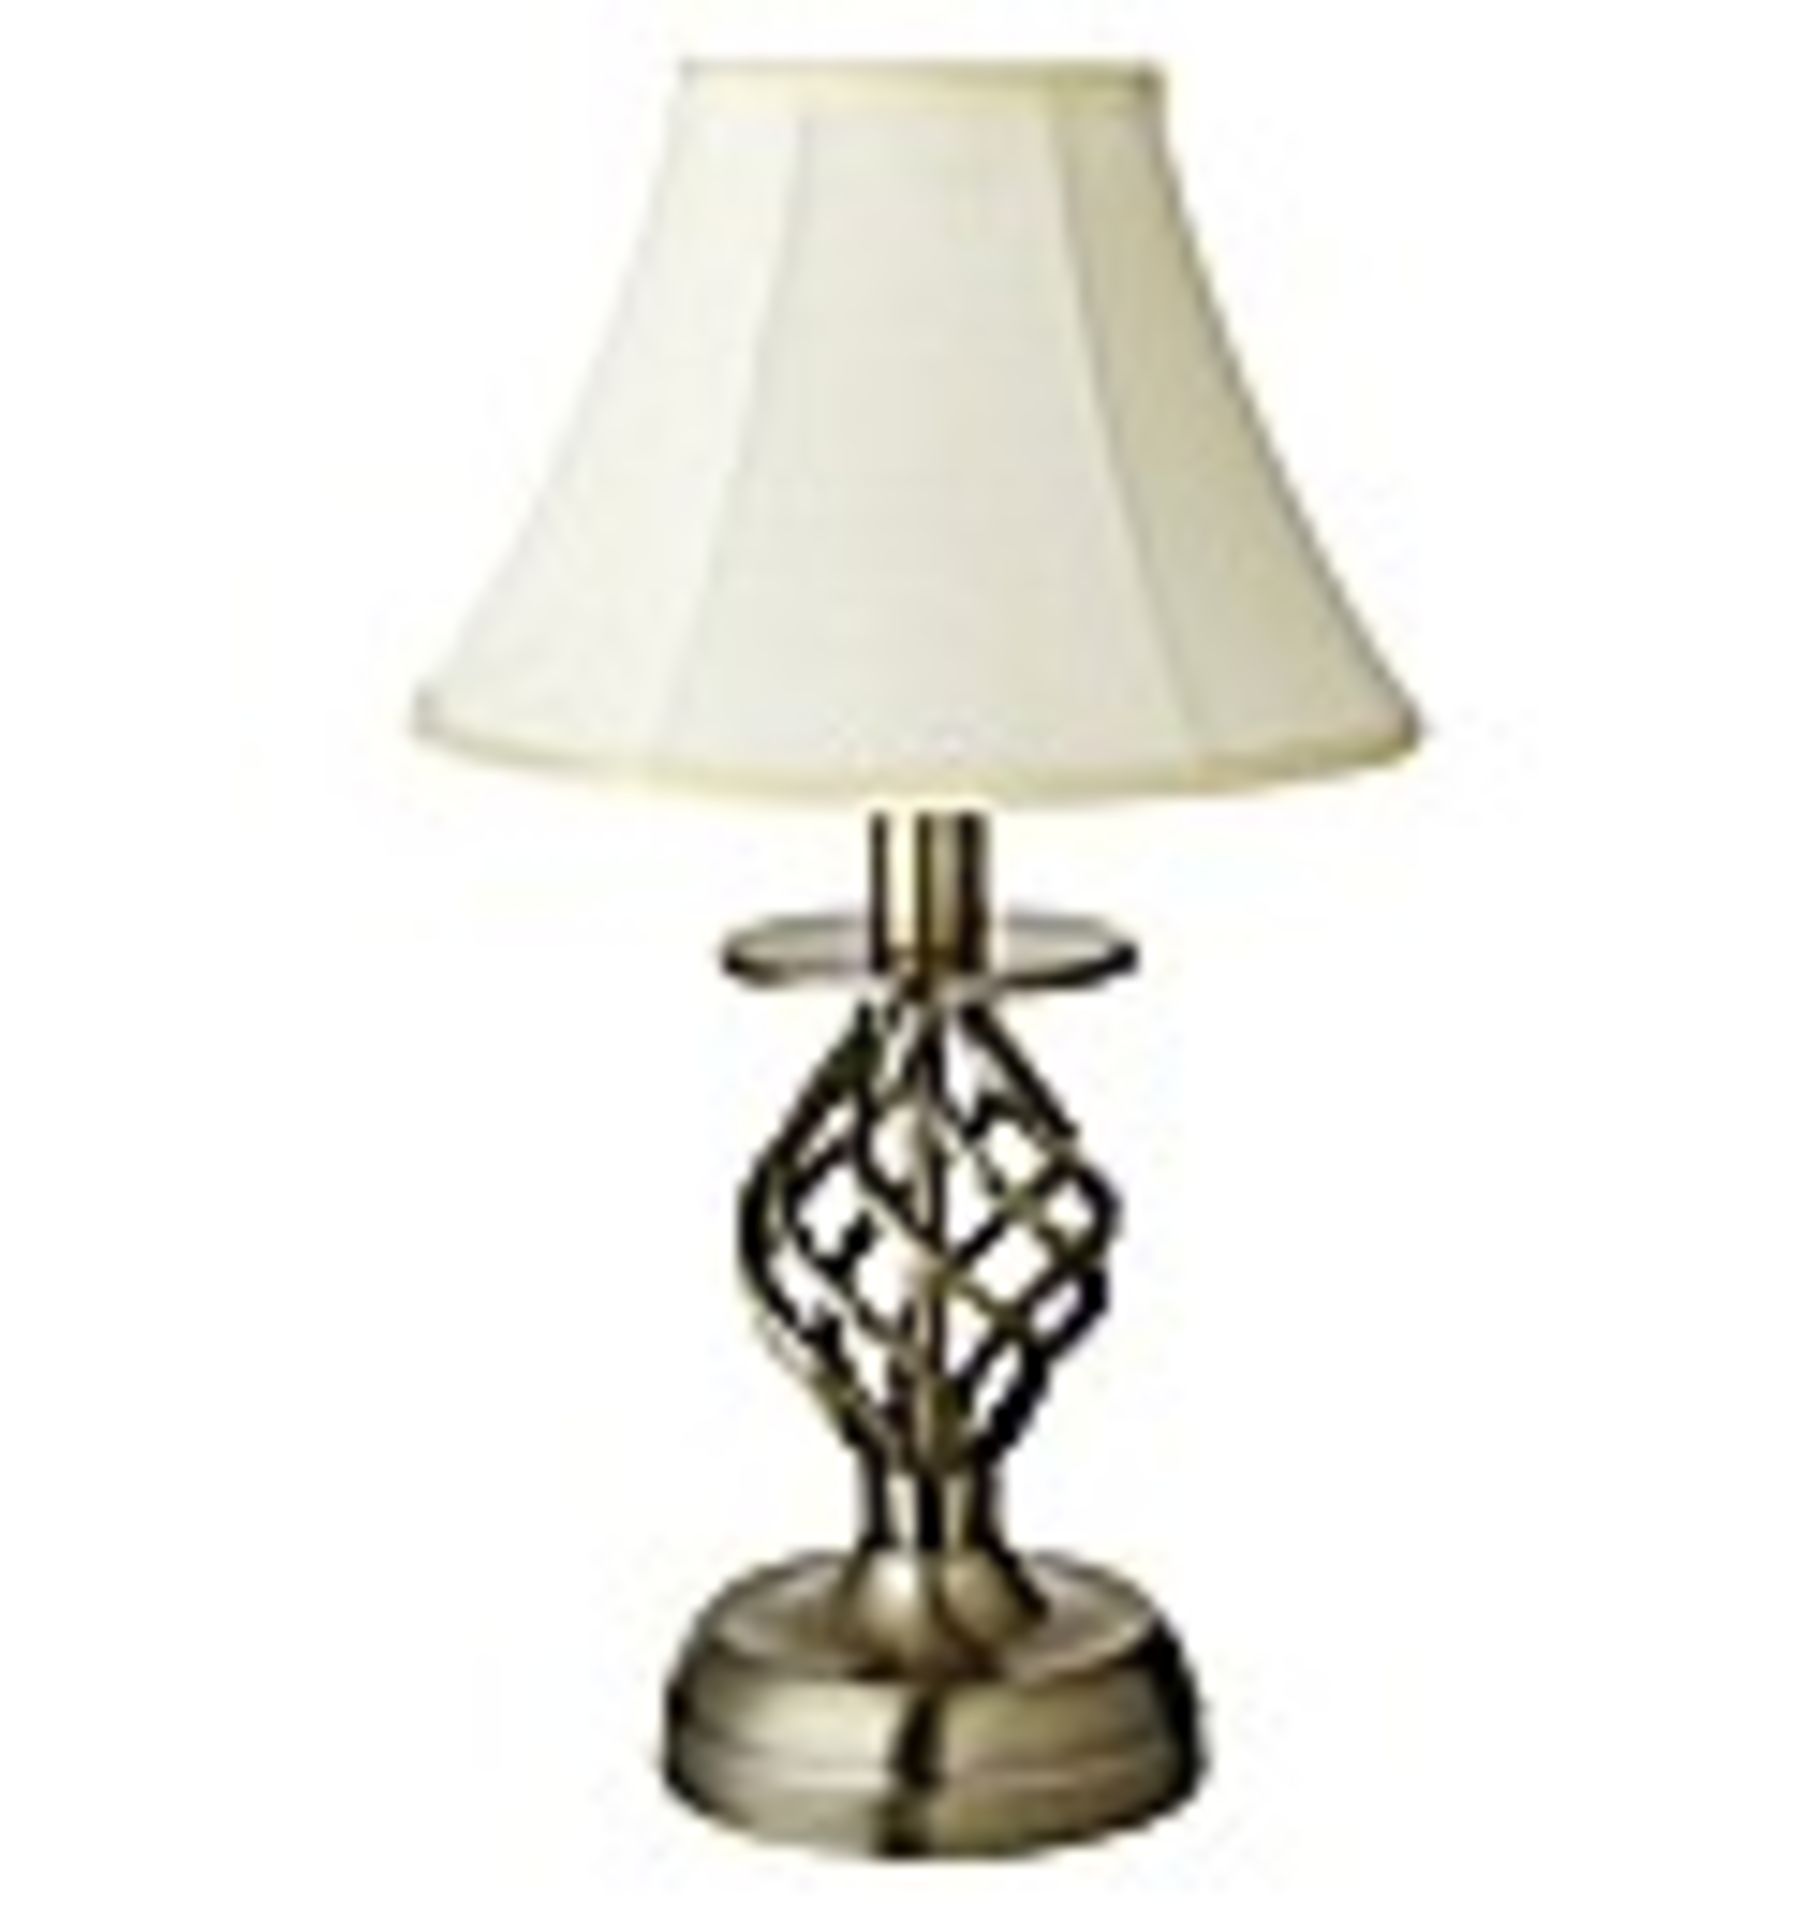 Barley Table Touch Lamp LU092201 RRP £ 27